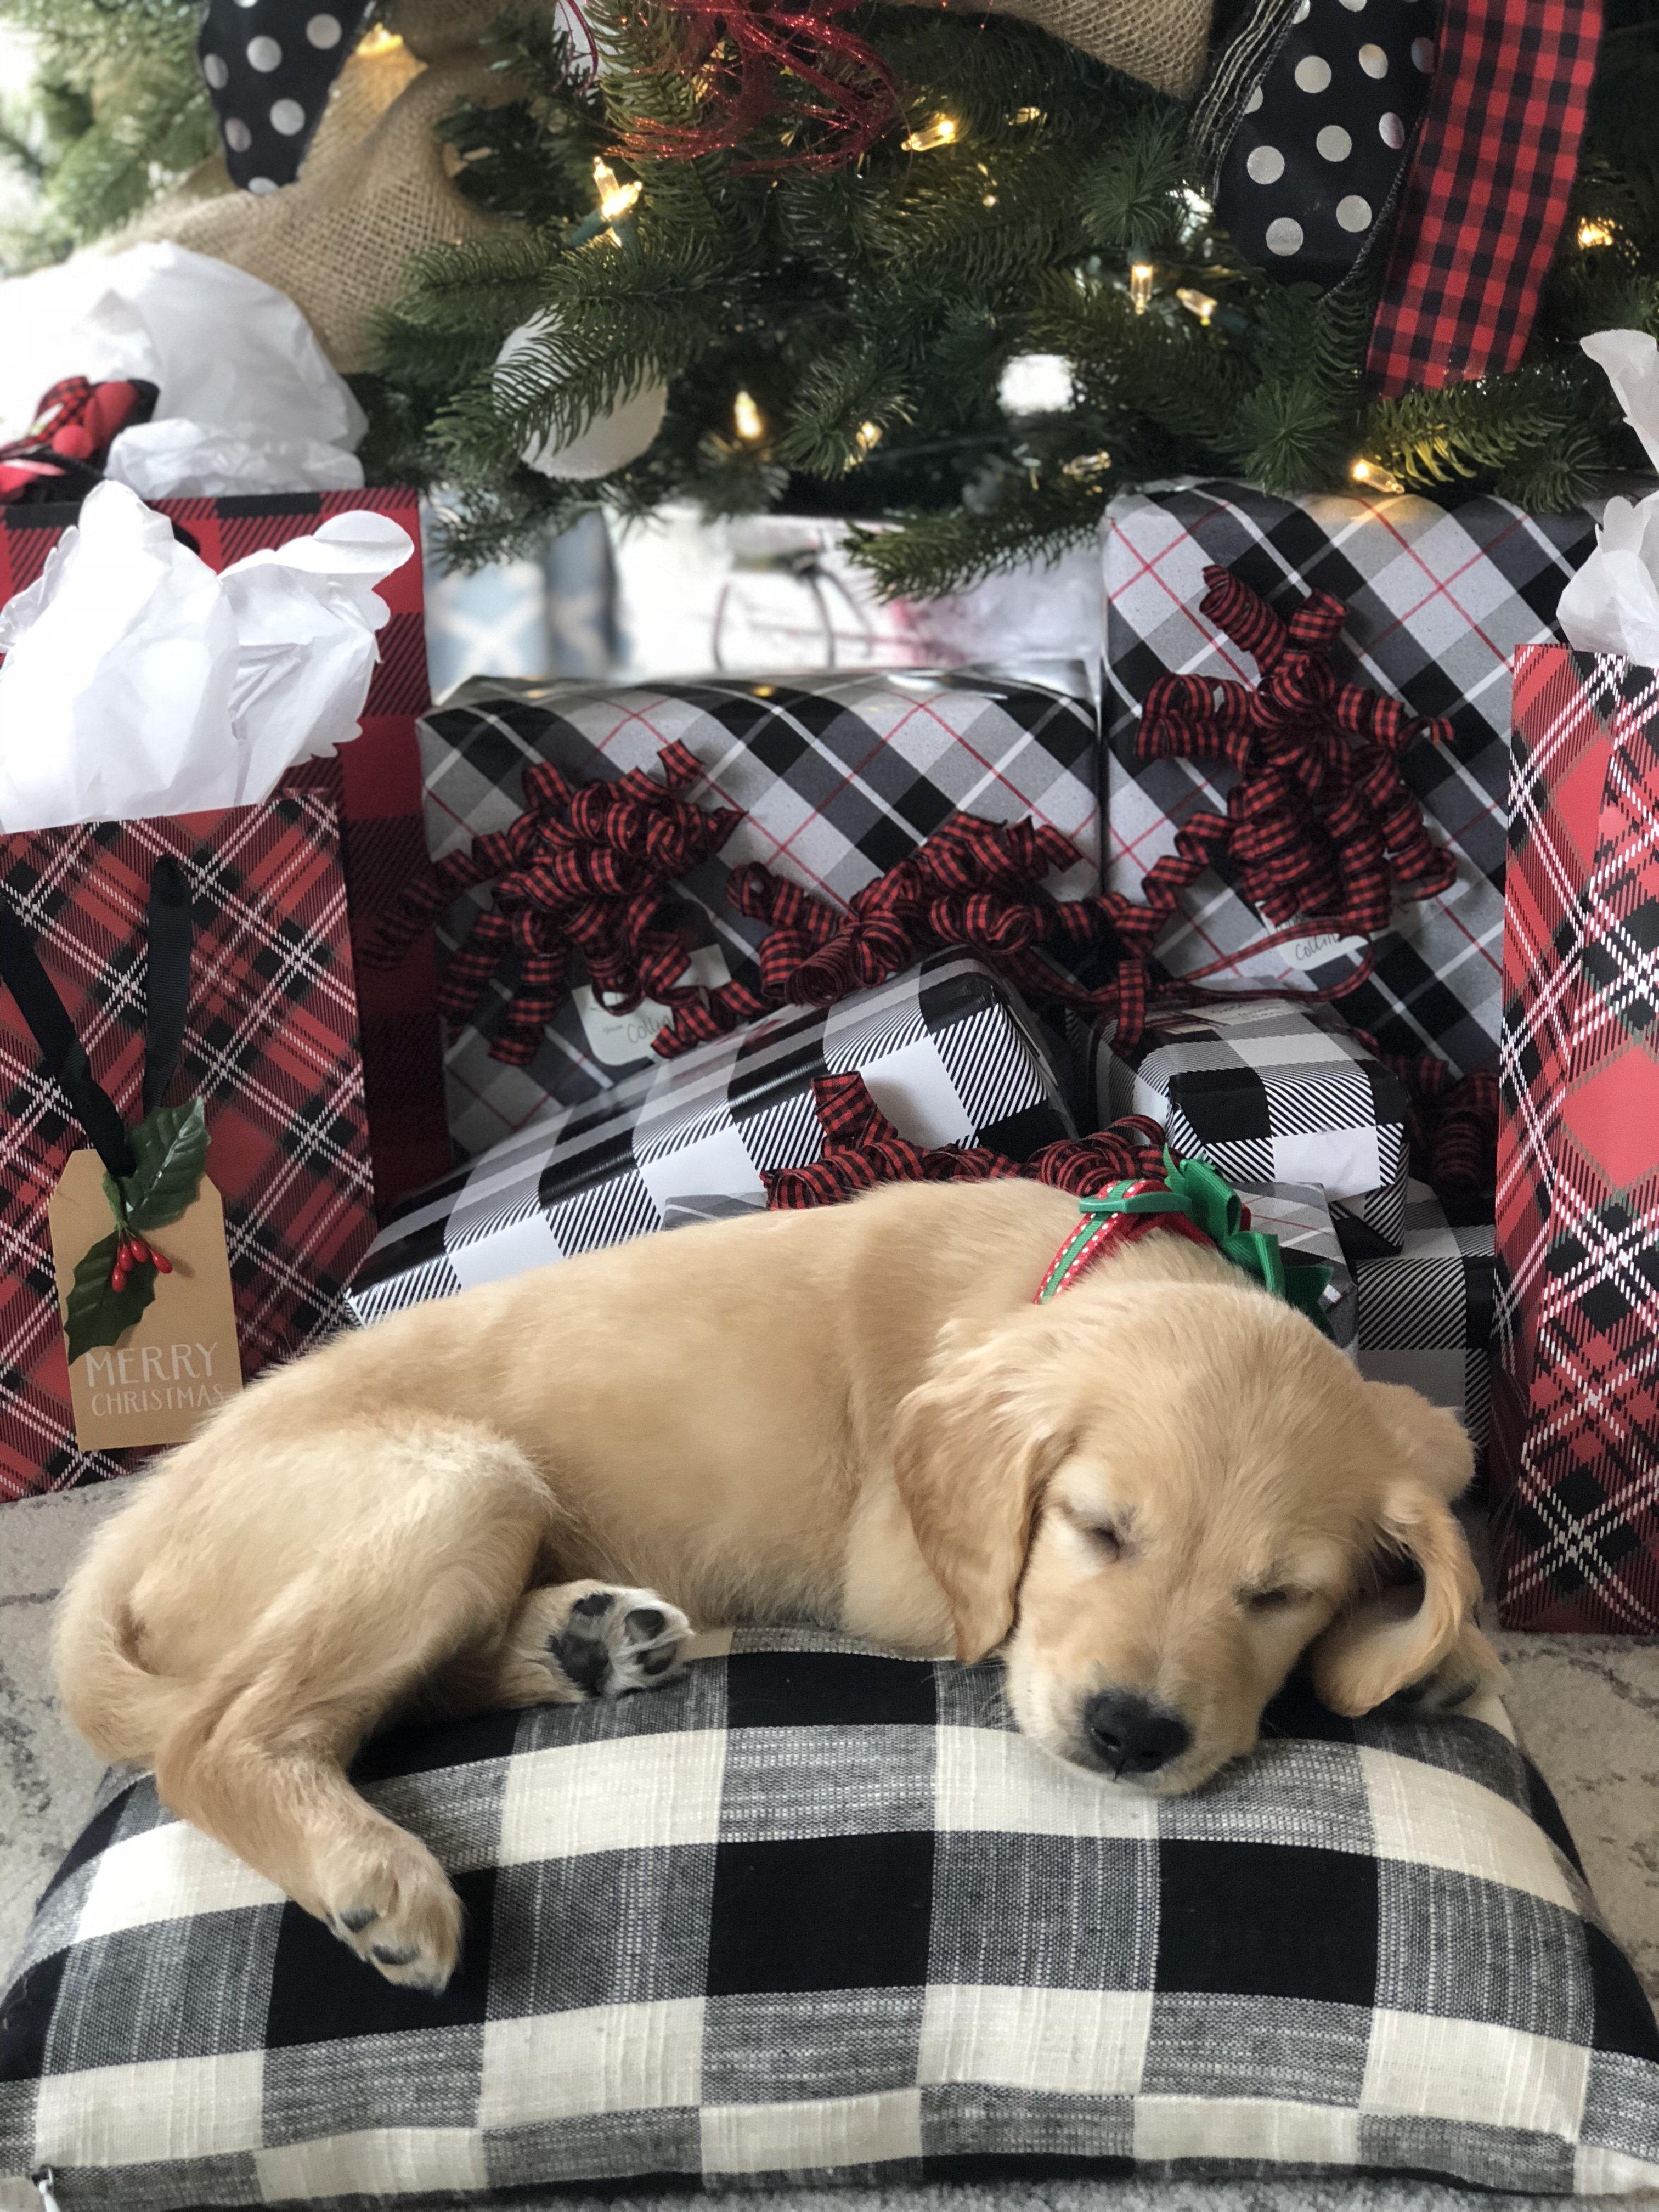 https://www.wilshirecollections.com/wp-content/uploads/2017/12/Christmas-surprise-puppy-under-the-tree-with-presents.jpg